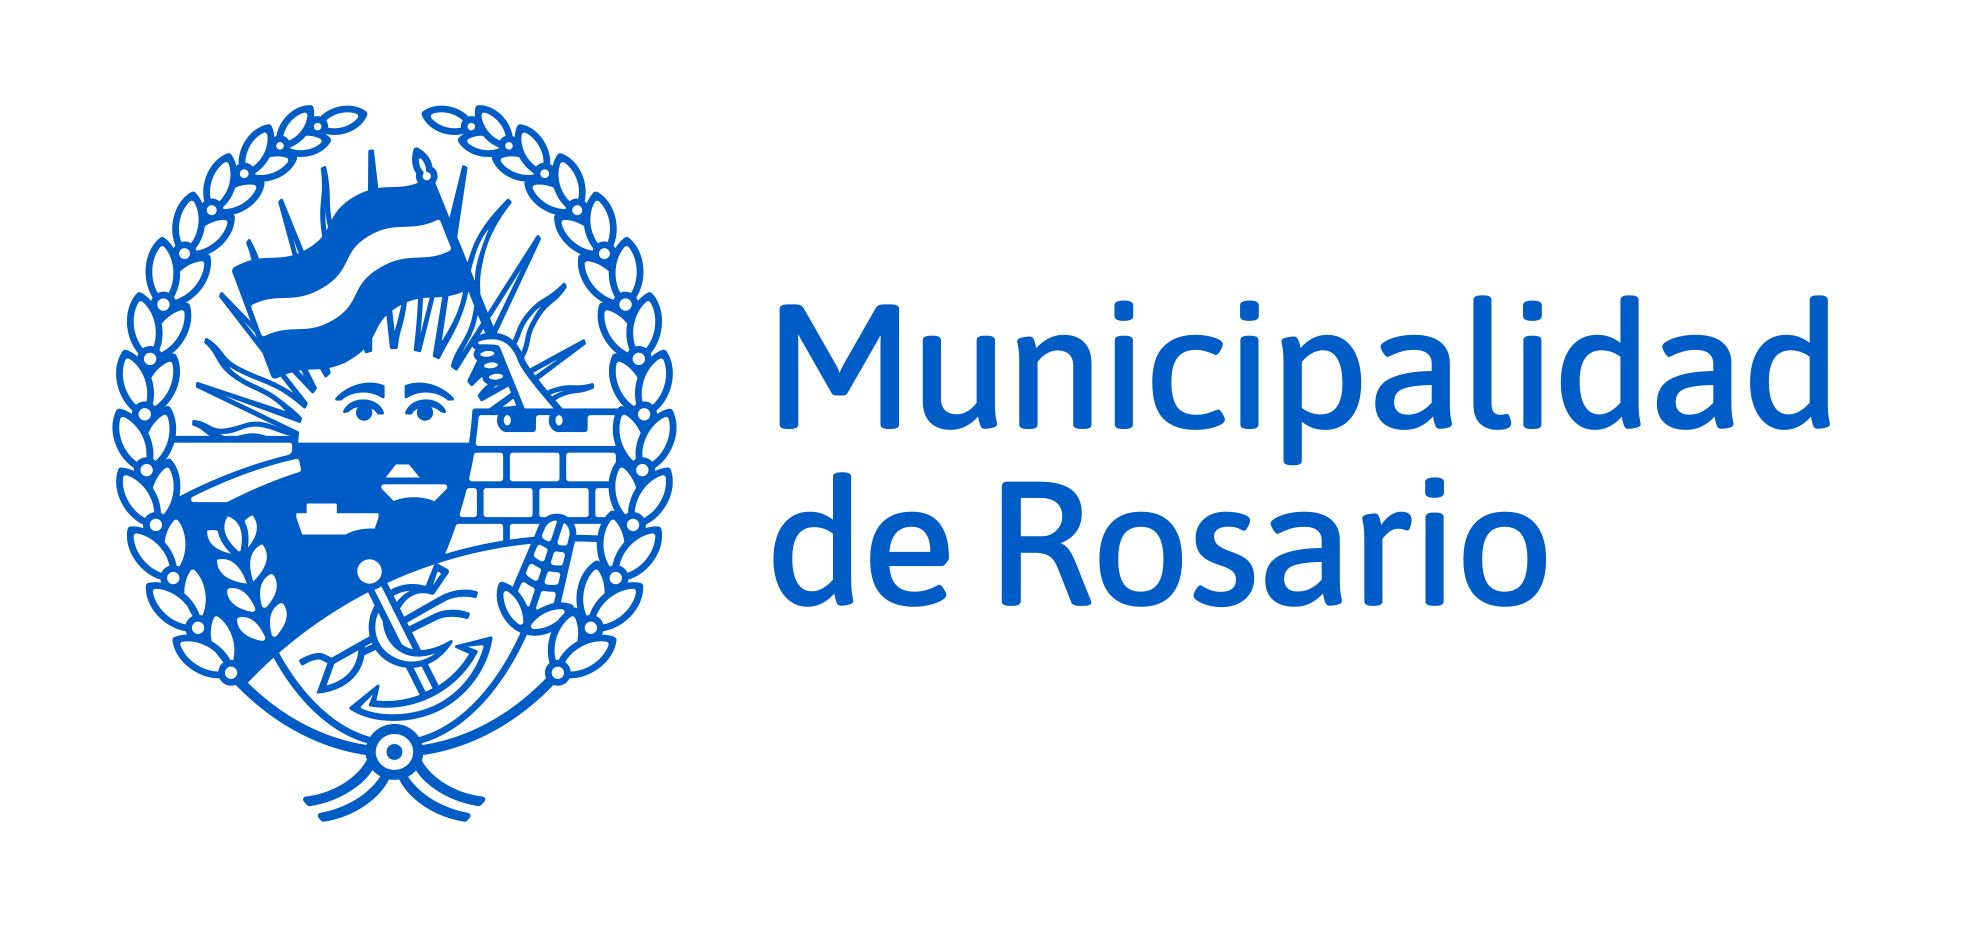 The flag of Municipality of Rosario, Mexico